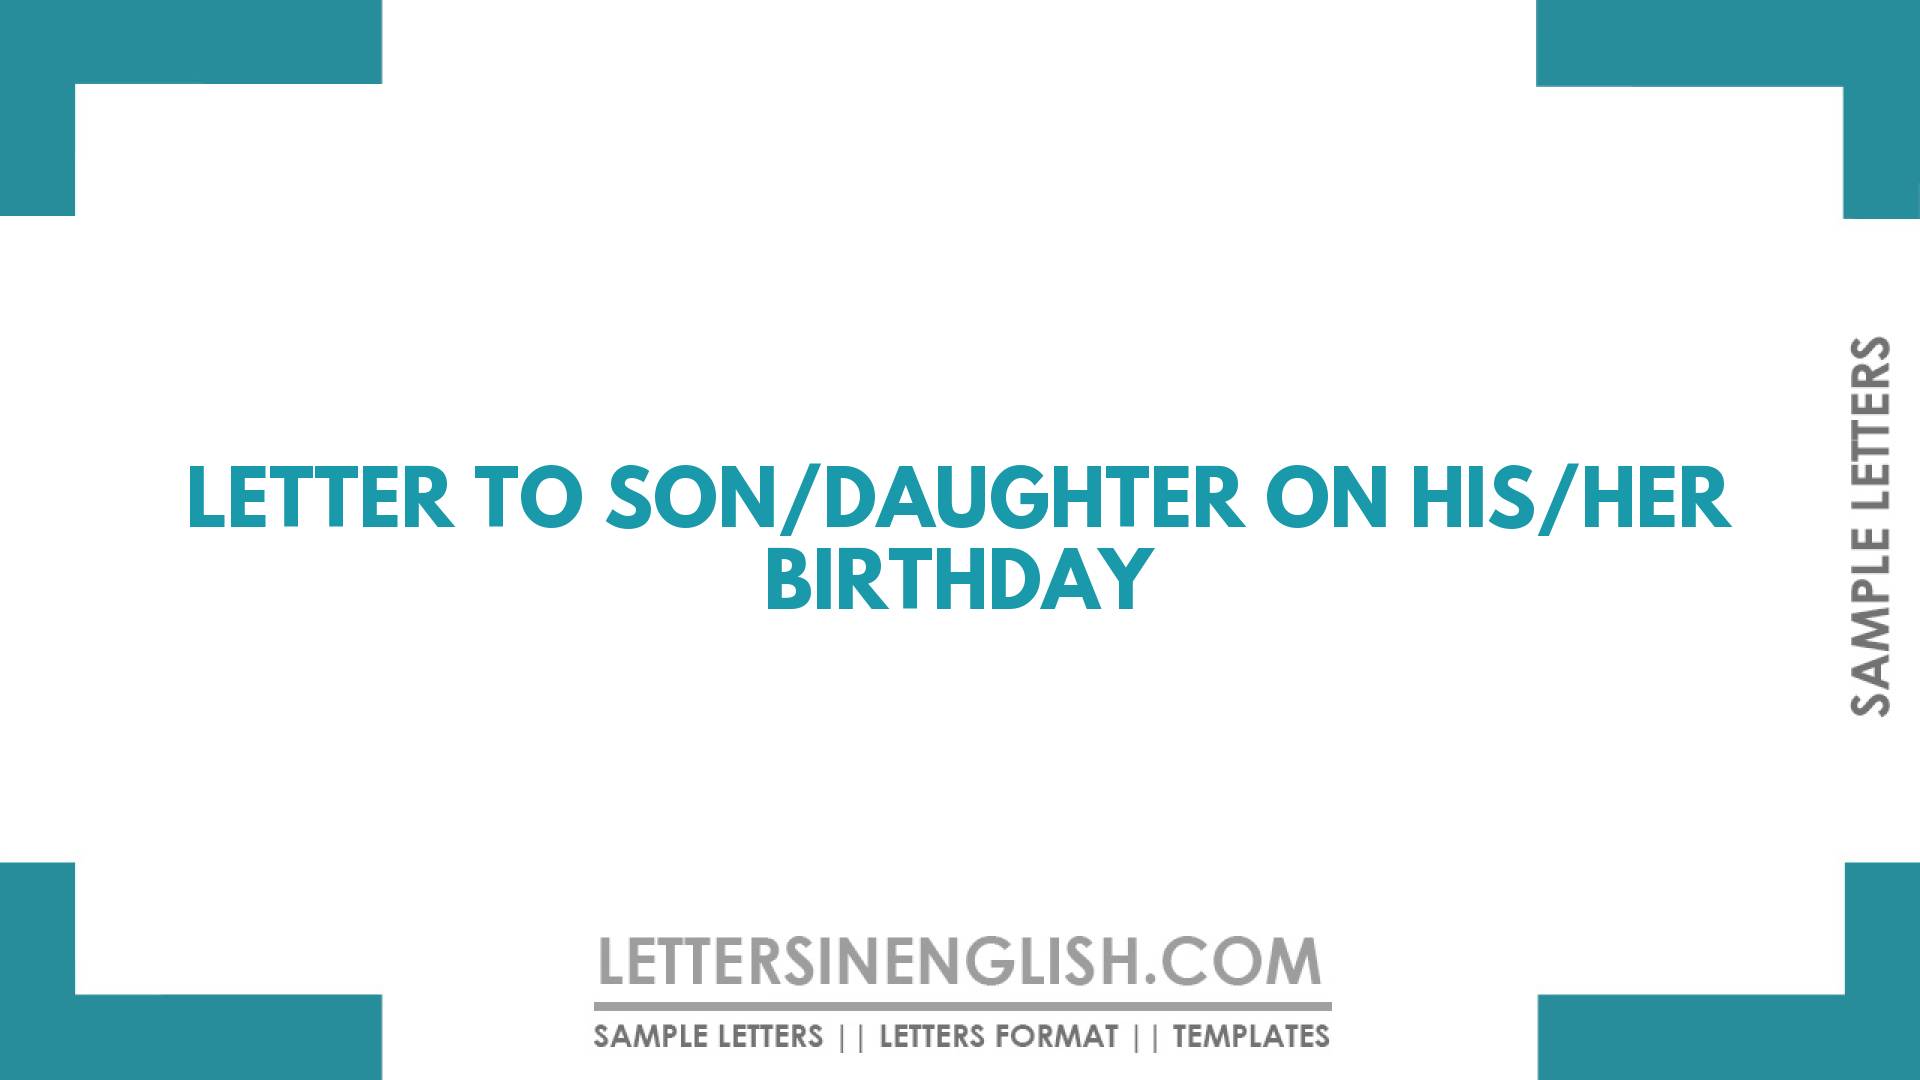 Letter To Son/Daughter On His/Her Birthday